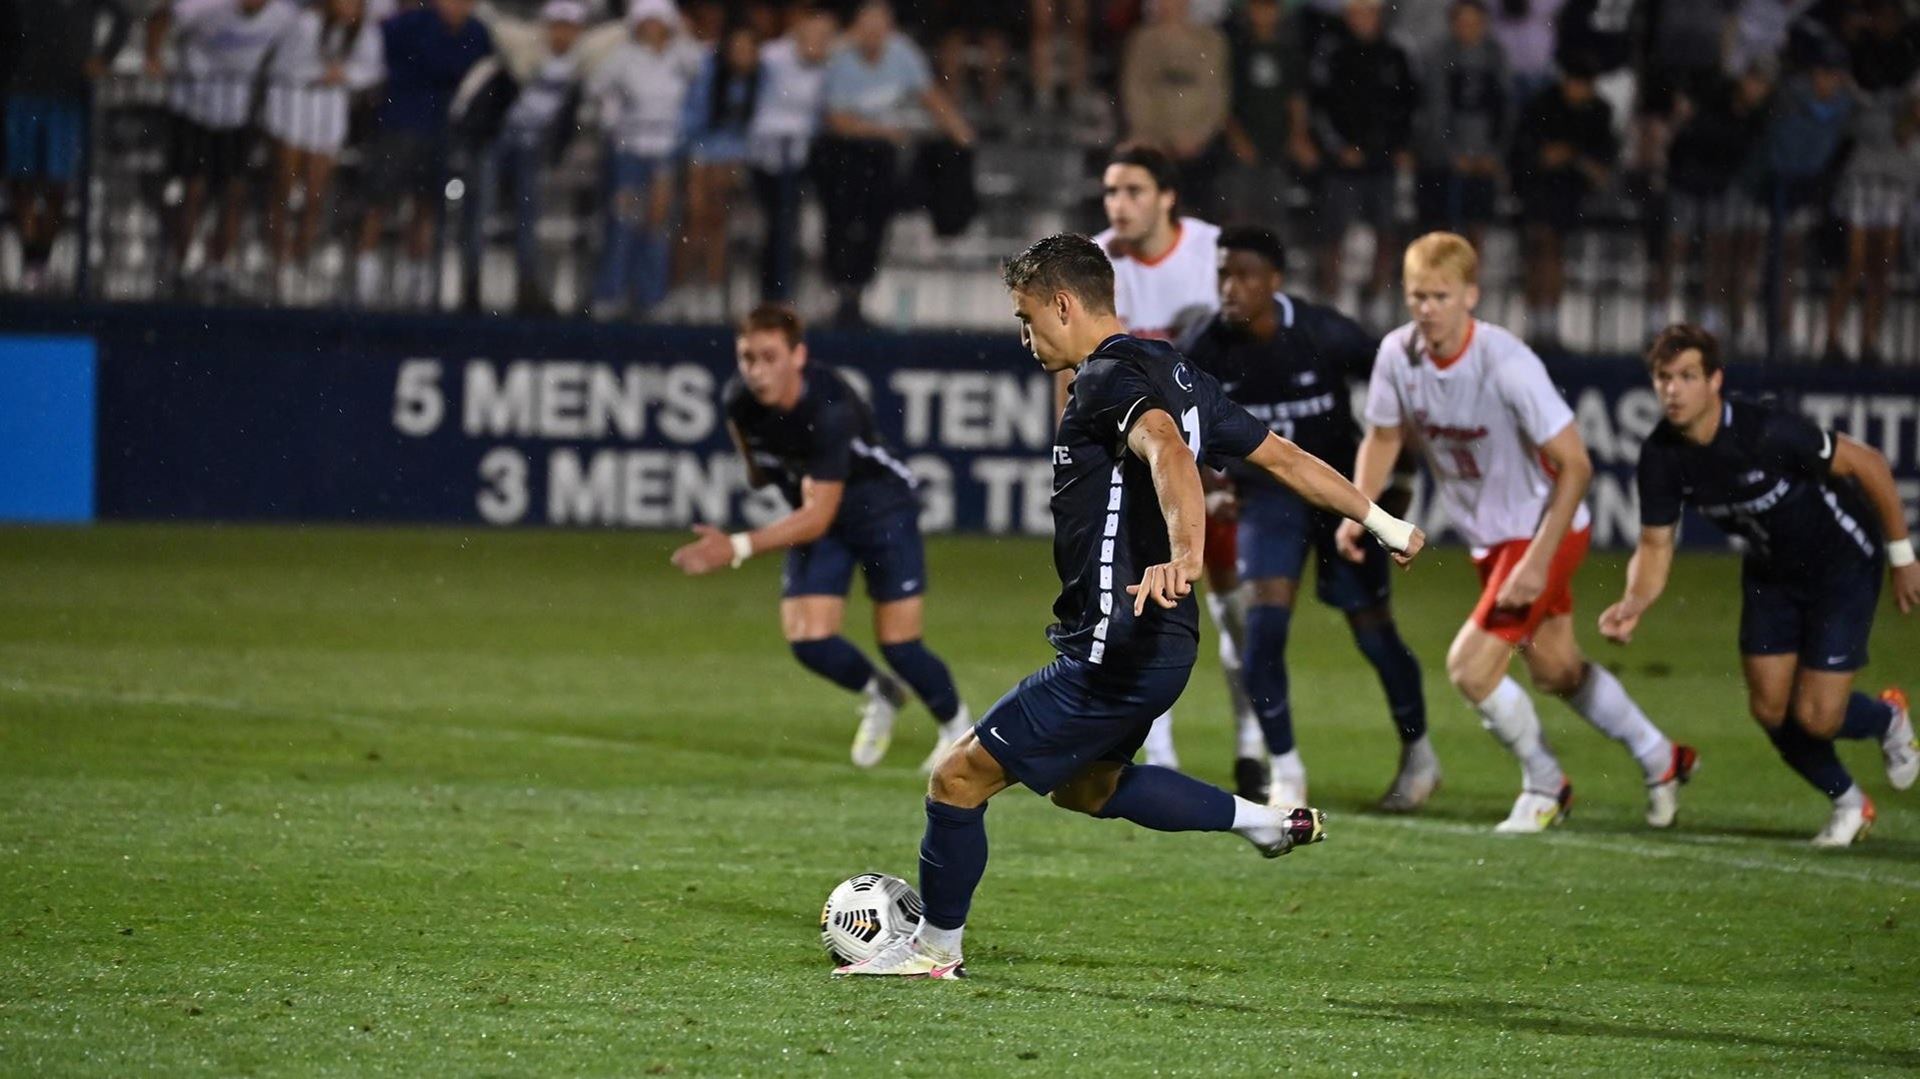 Men's Weekend Preview: Friday night action